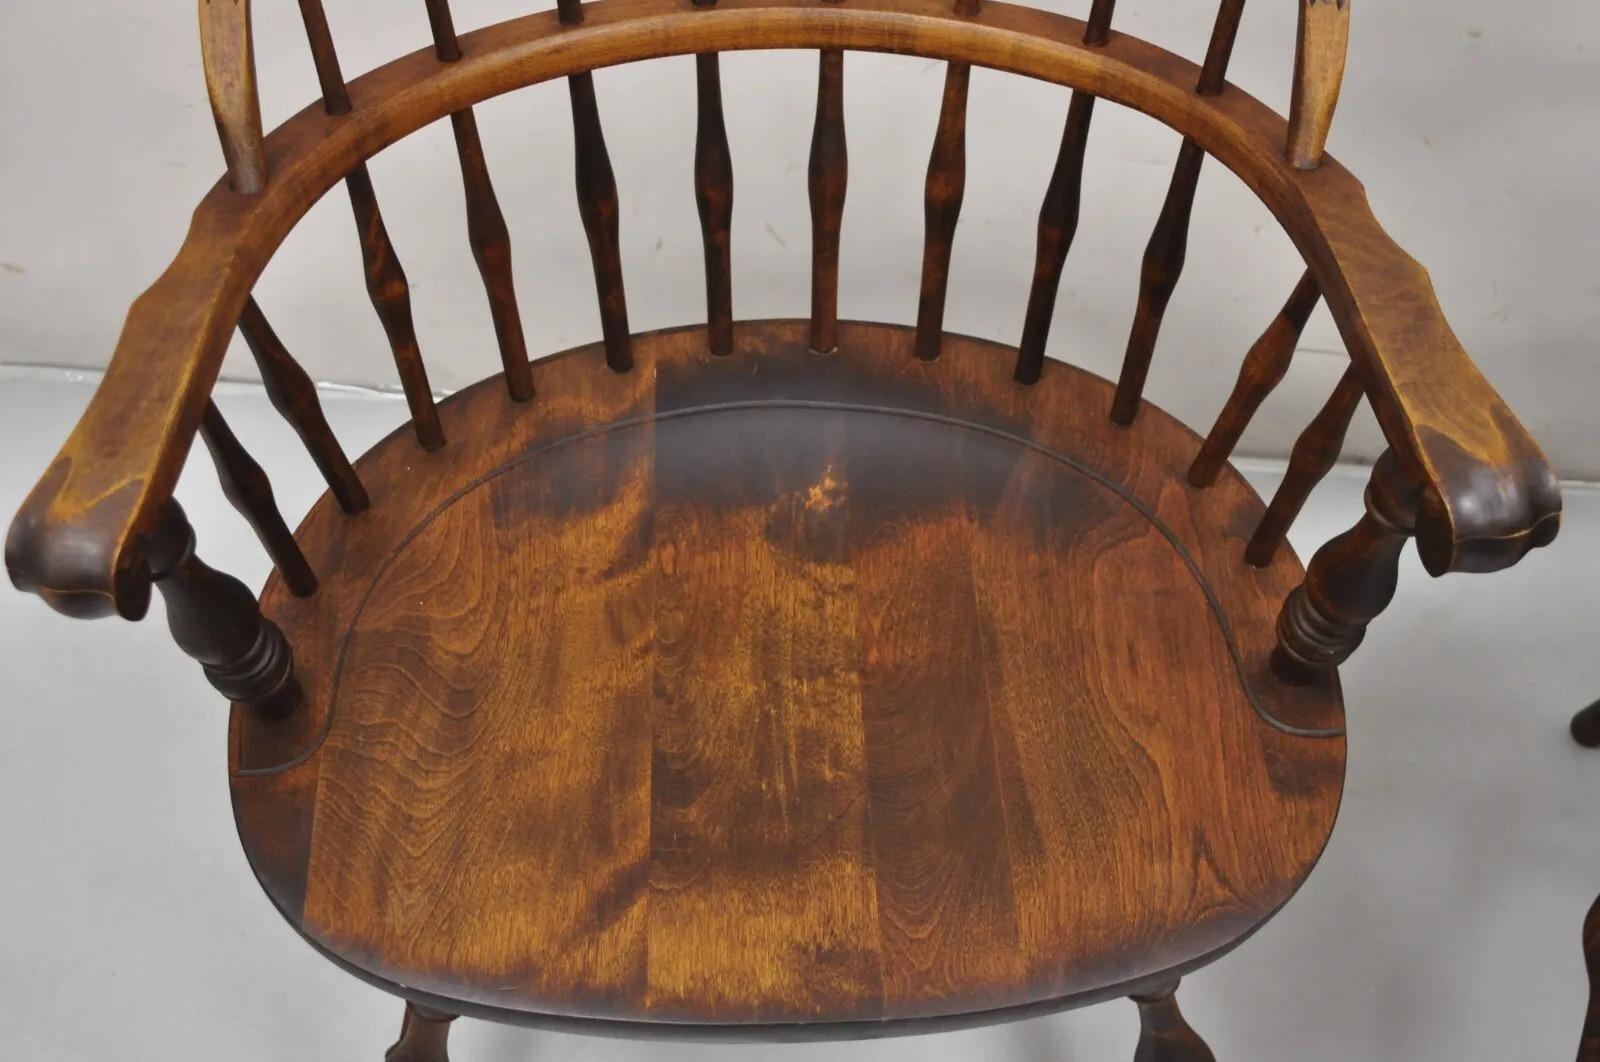 Nichols & Stone Rock Maple Wood Bowback Colonial Windsor Arm Chairs - a Pair For Sale 2